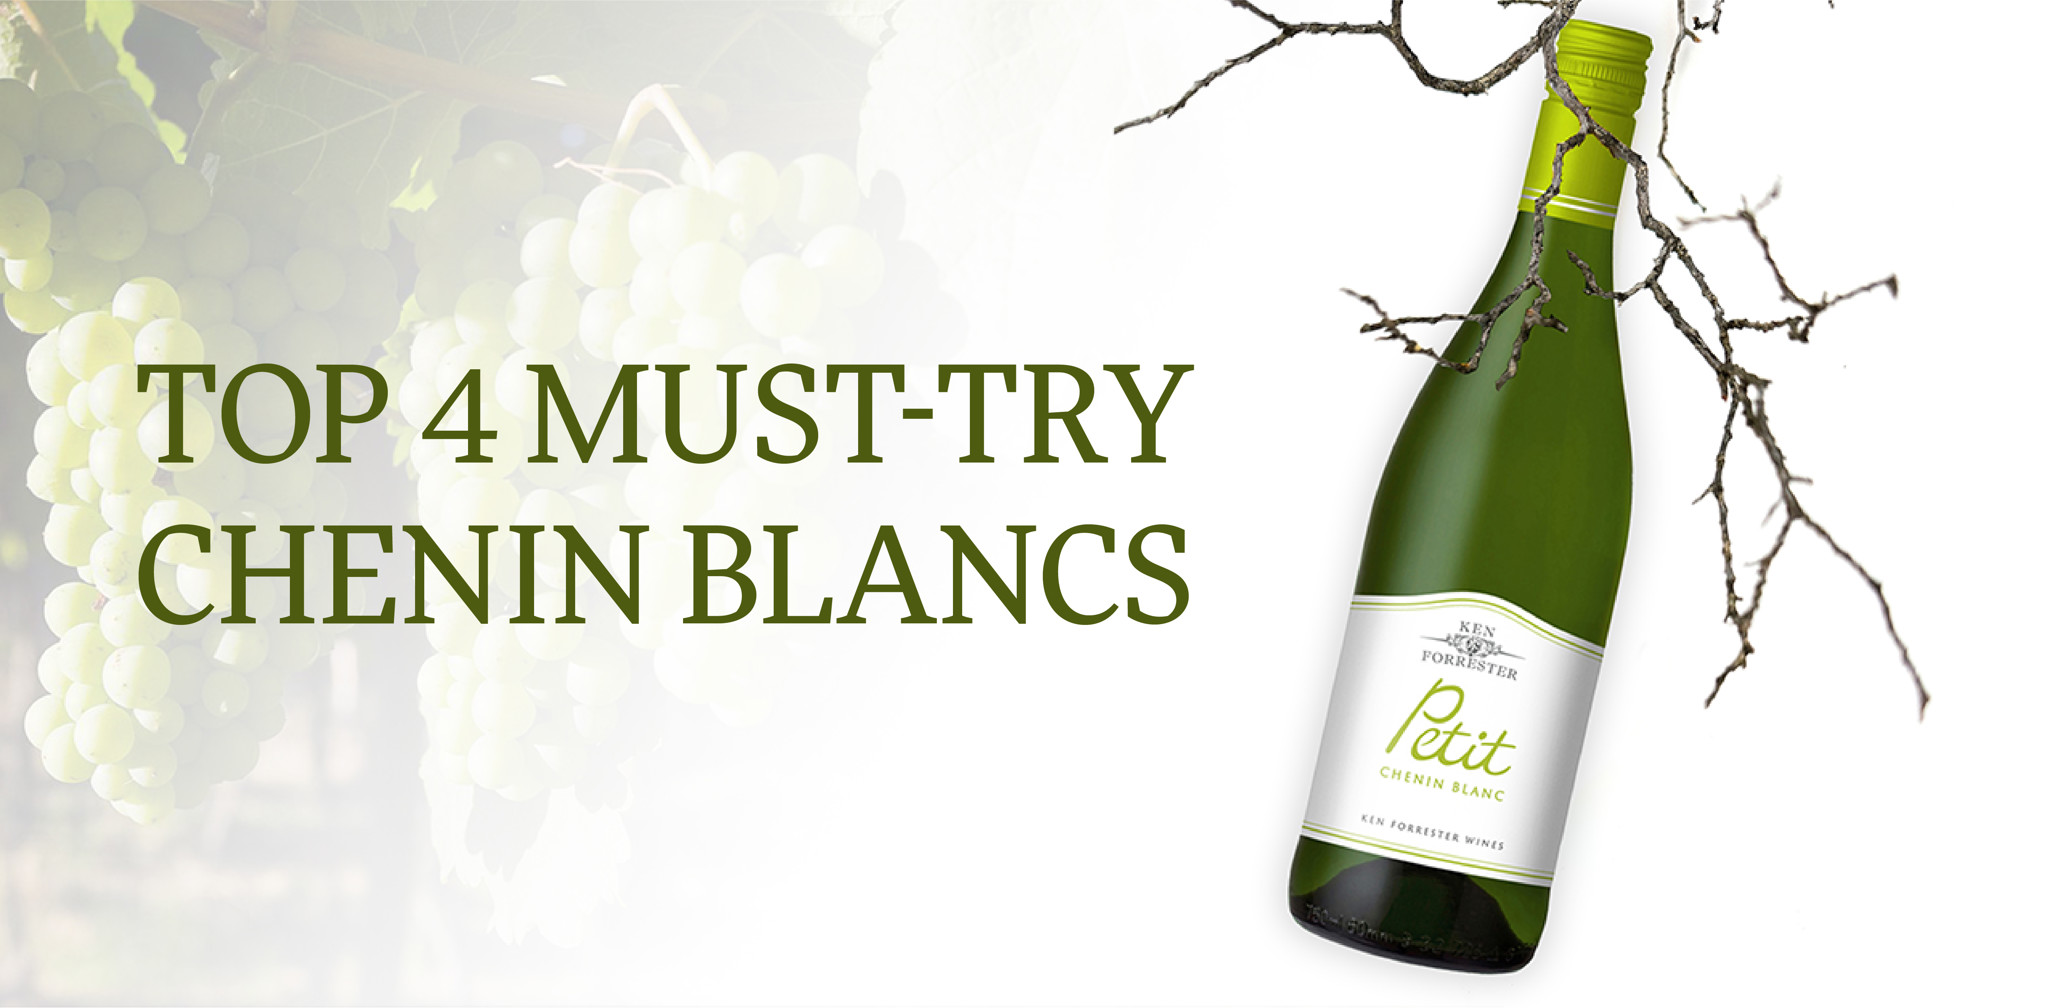 CHECK OUT THESE 4 MUST-TRY CHENIN BLANCS - STARTING FROM VND600,000